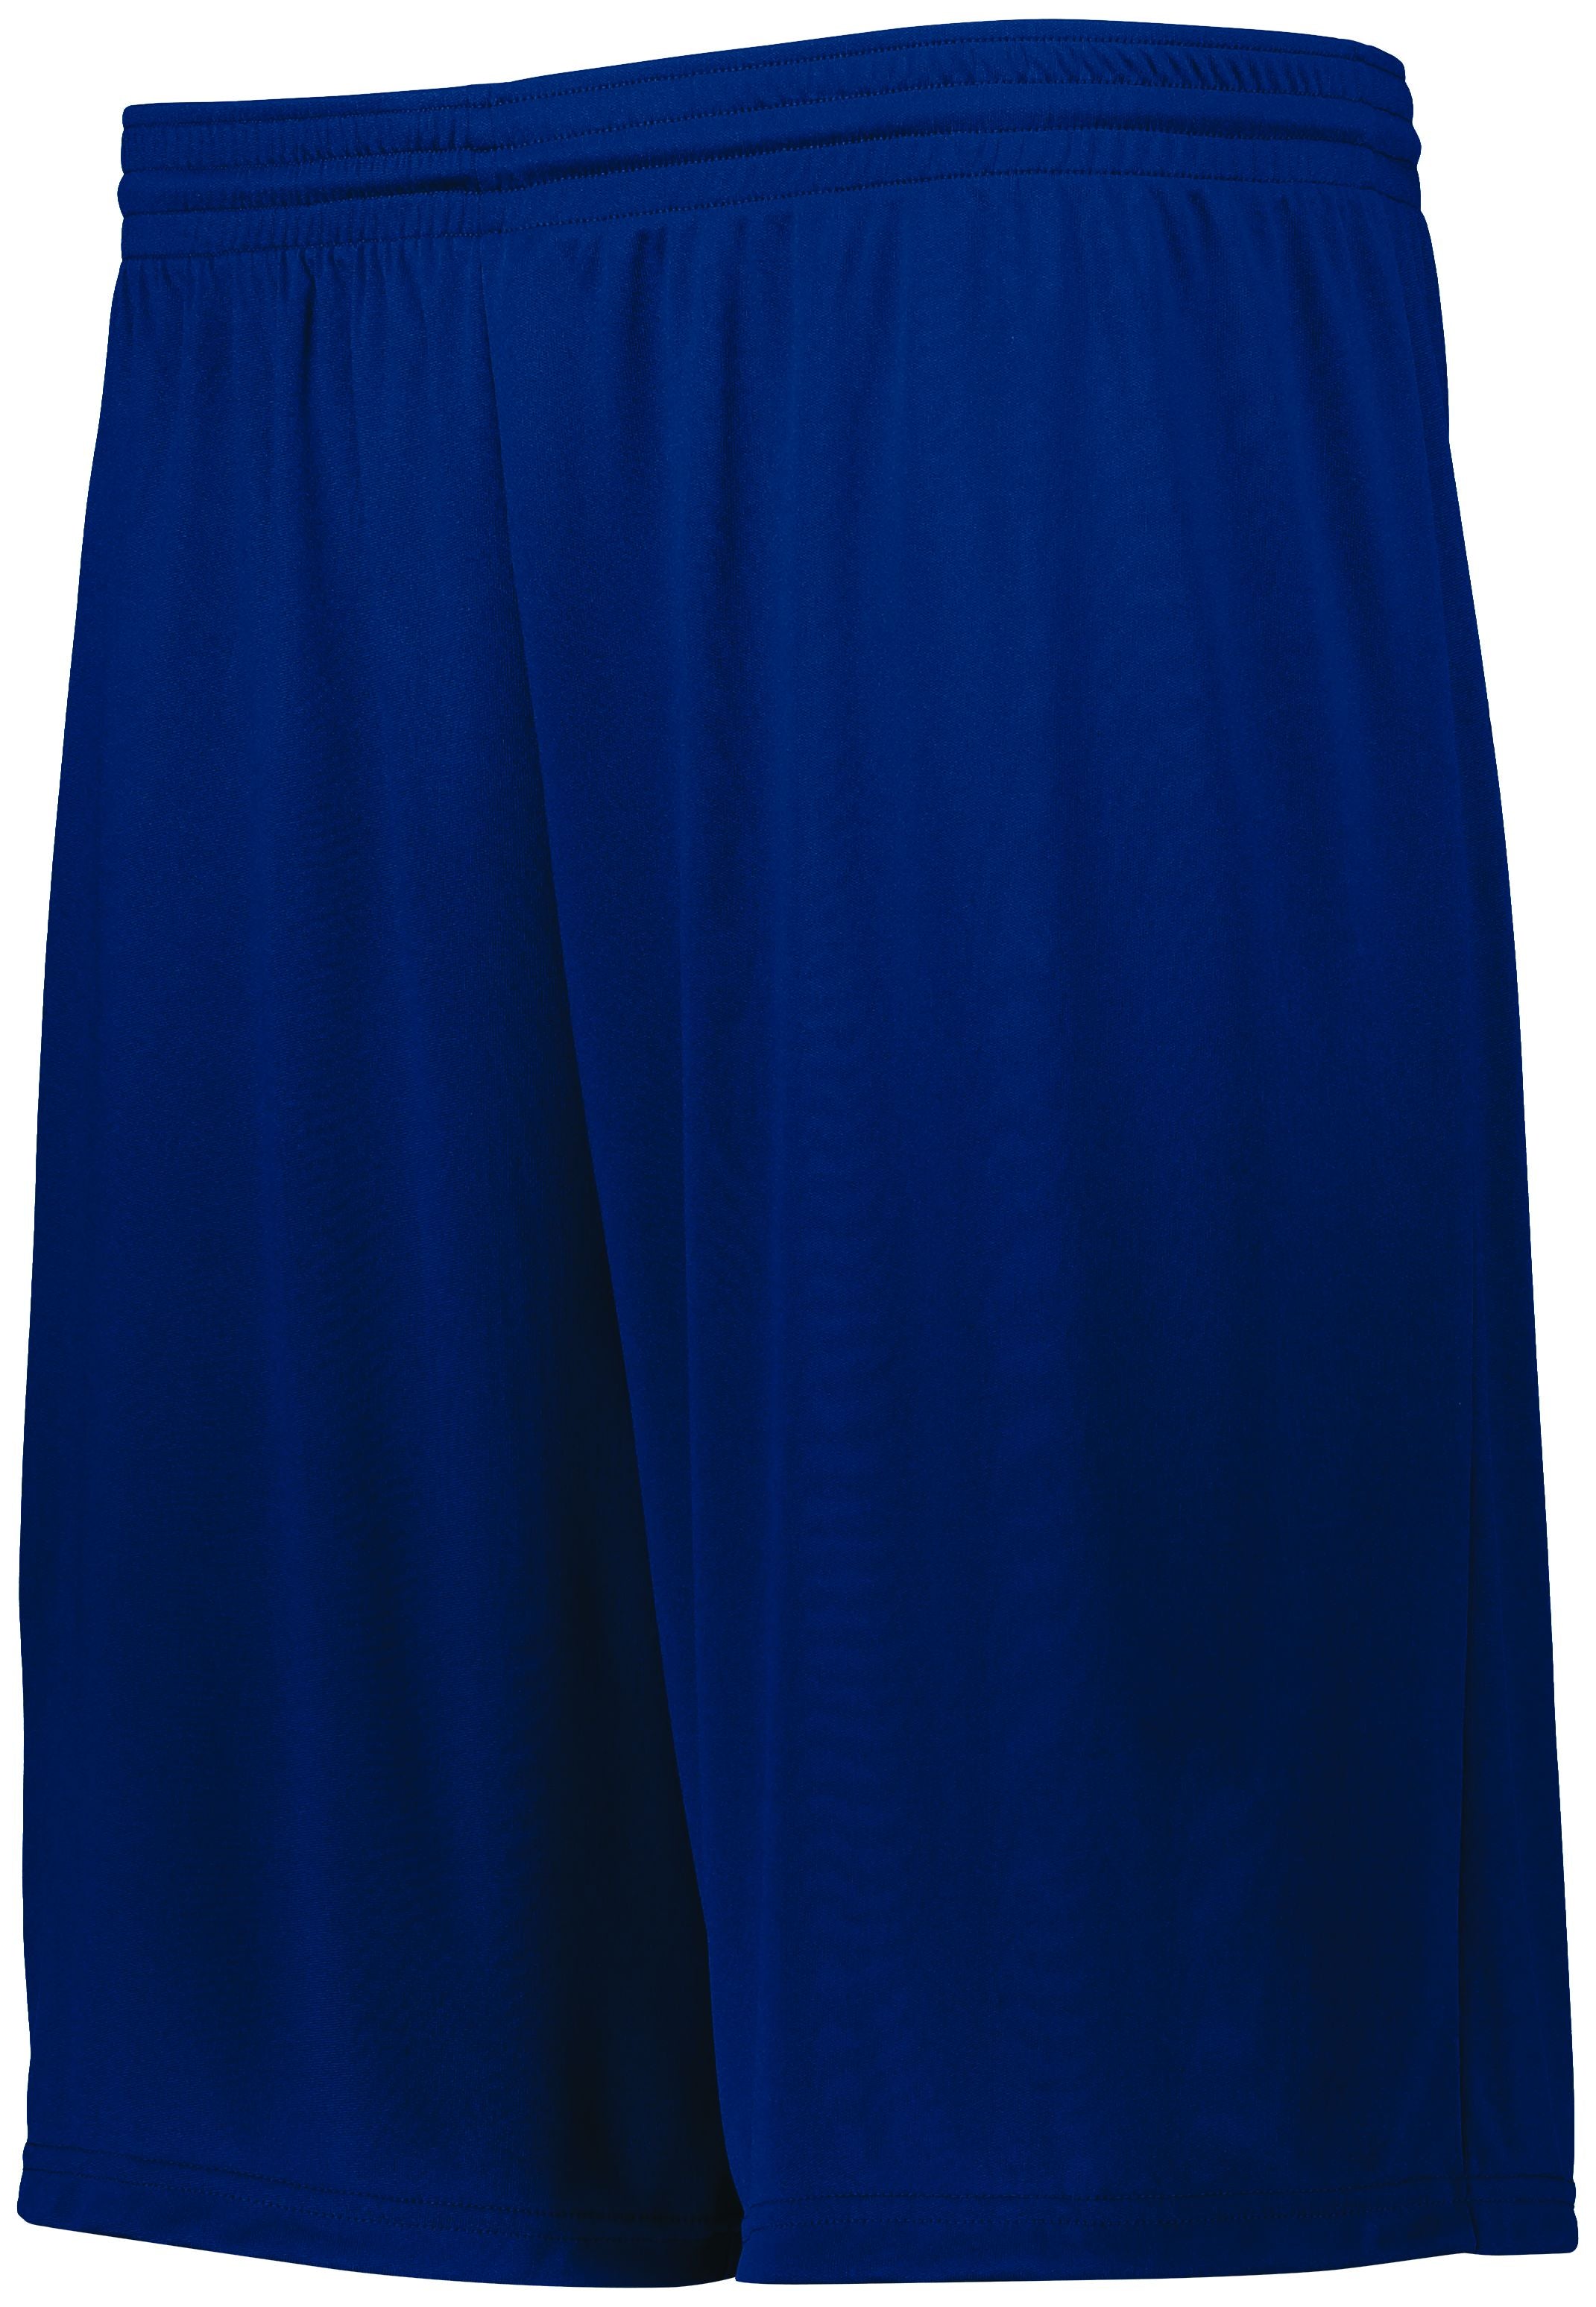 Augusta Sportswear Attain Wicking Shorts in Navy  -Part of the Adult, Adult-Shorts, Augusta-Products product lines at KanaleyCreations.com